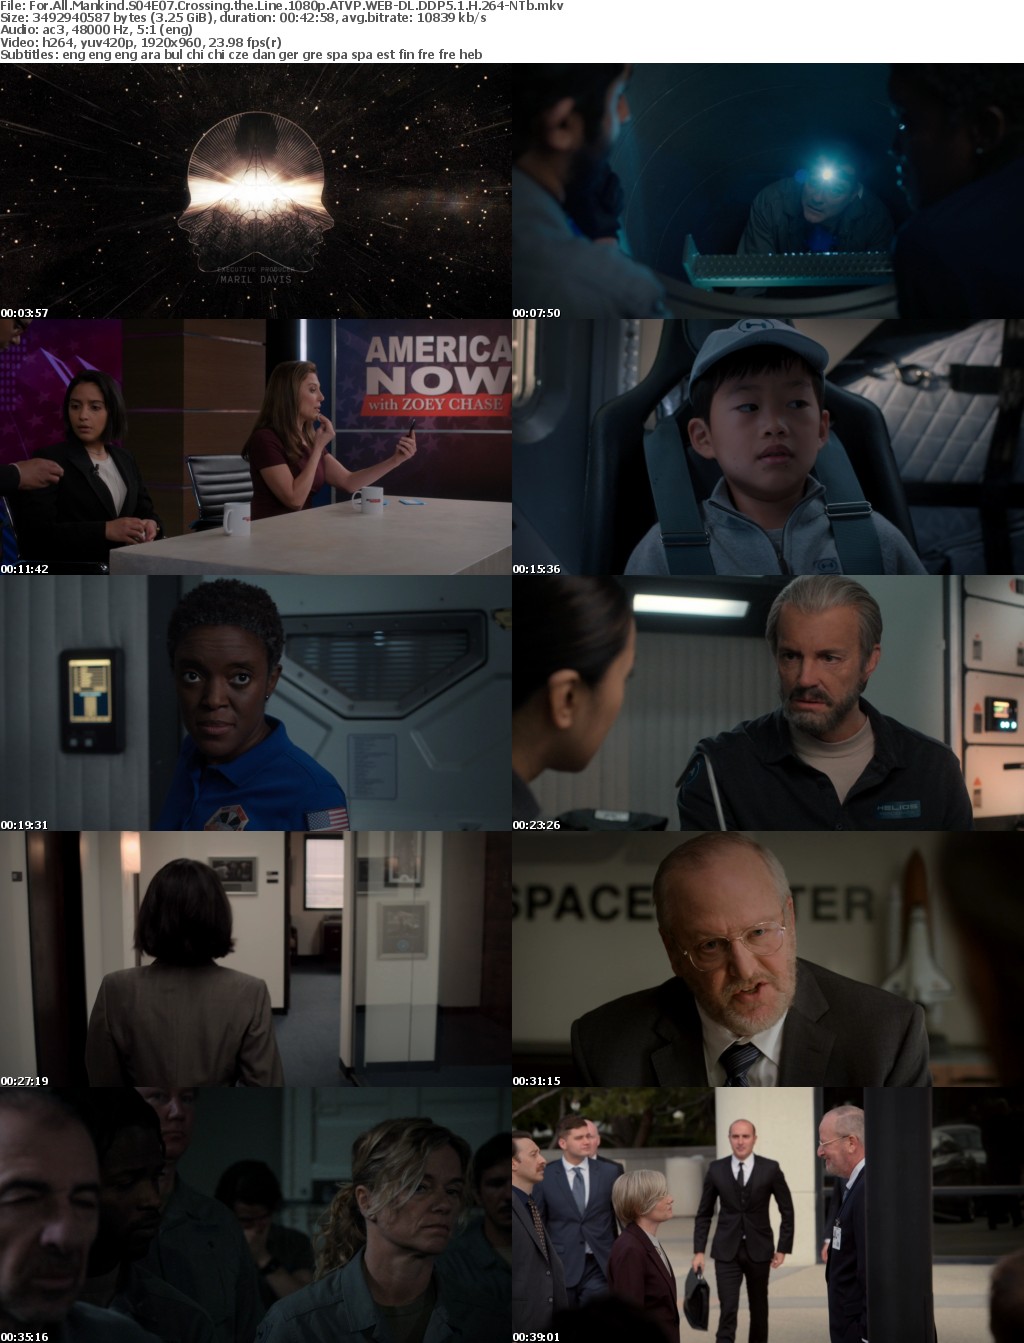 For All Mankind S04E07 Crossing the Line 1080p ATVP WEB-DL DDP5 1 H 264-NTb